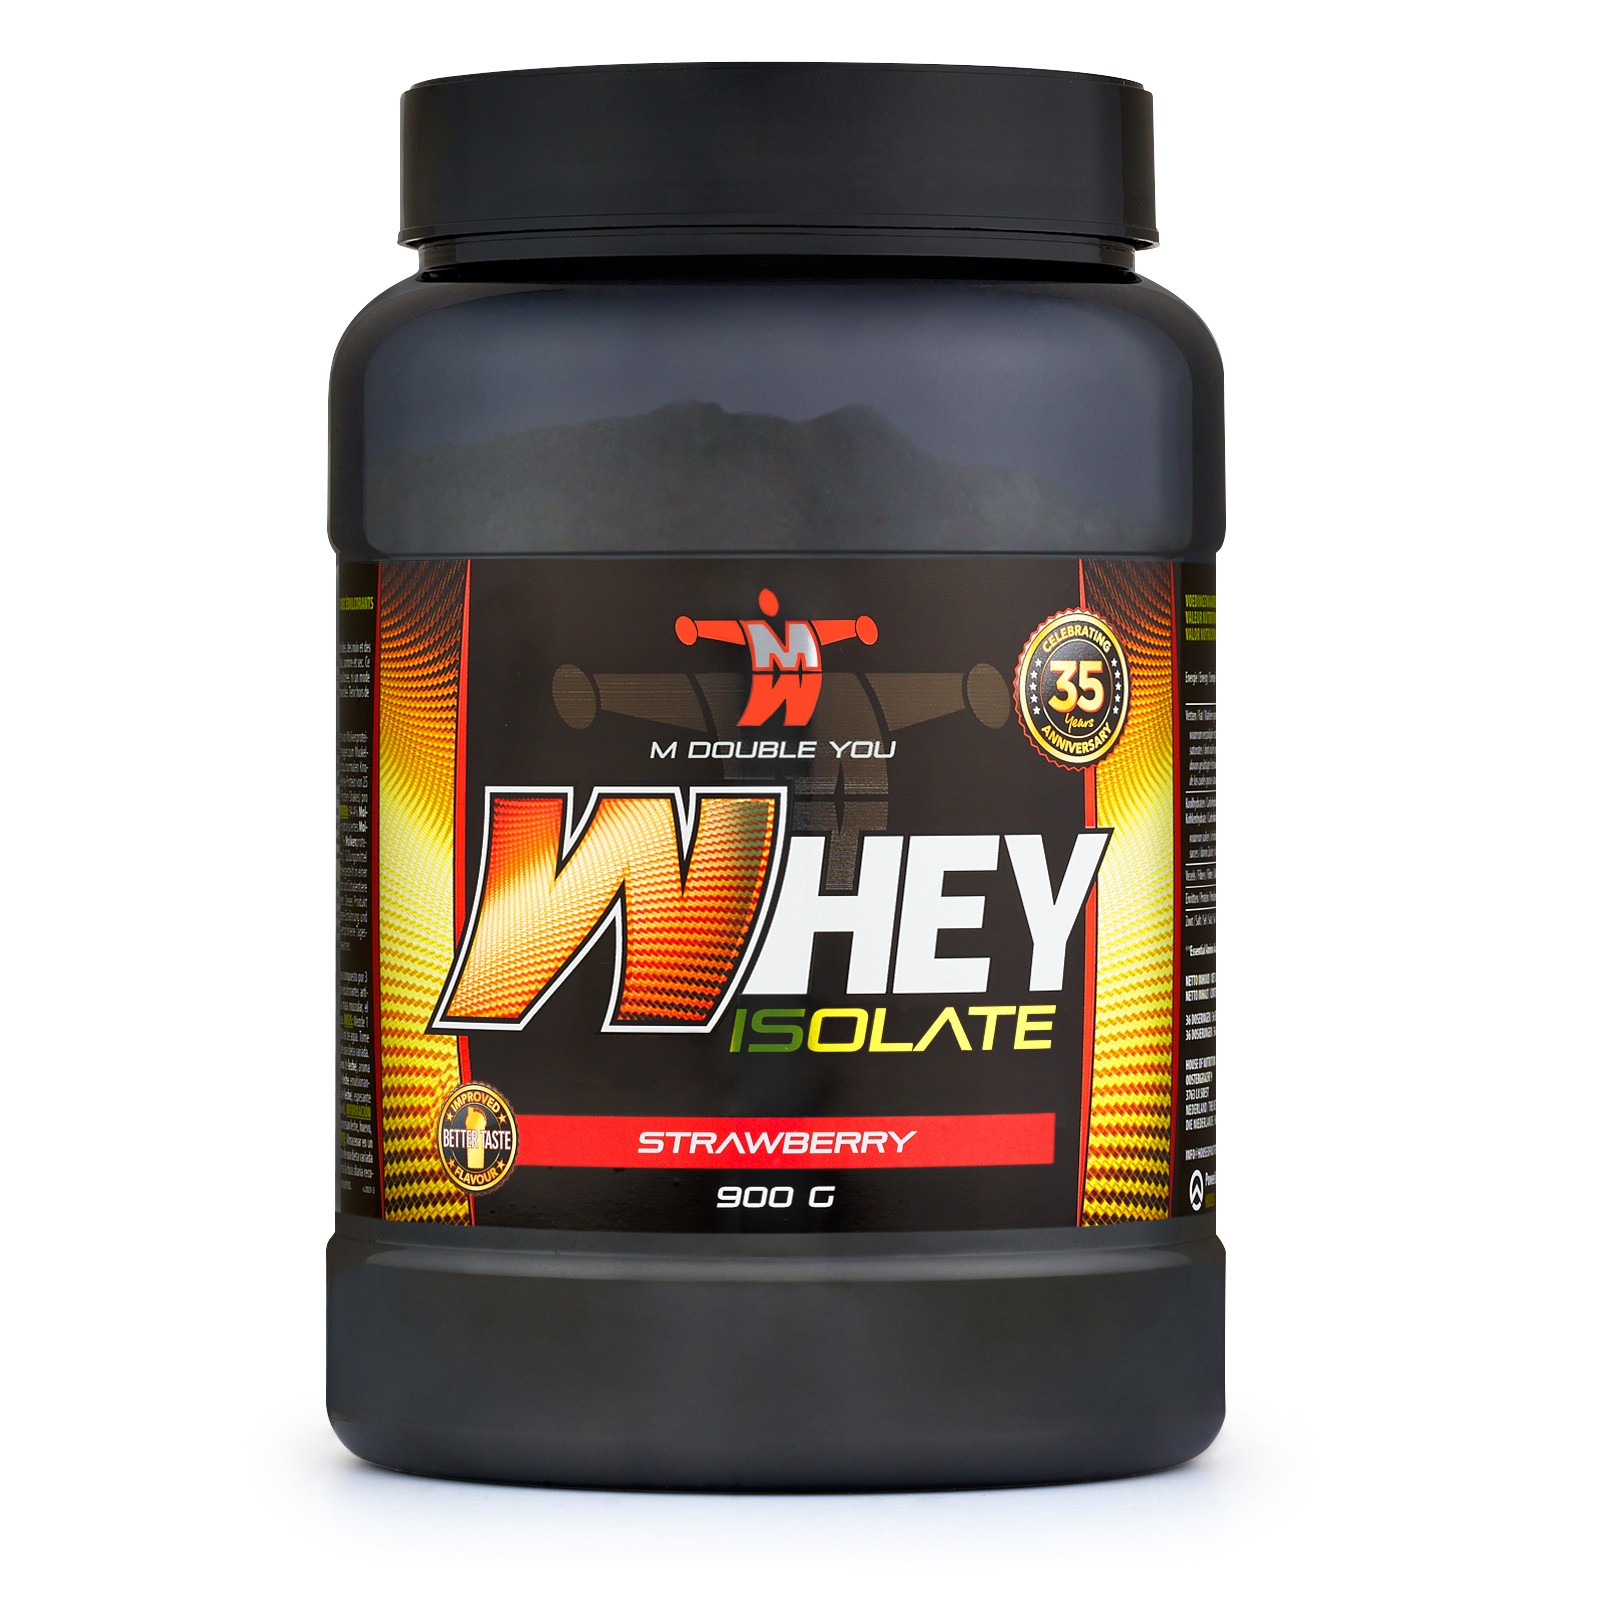 M DOUBLE YOU - Whey Isolate (Strawberry - 900 gram)